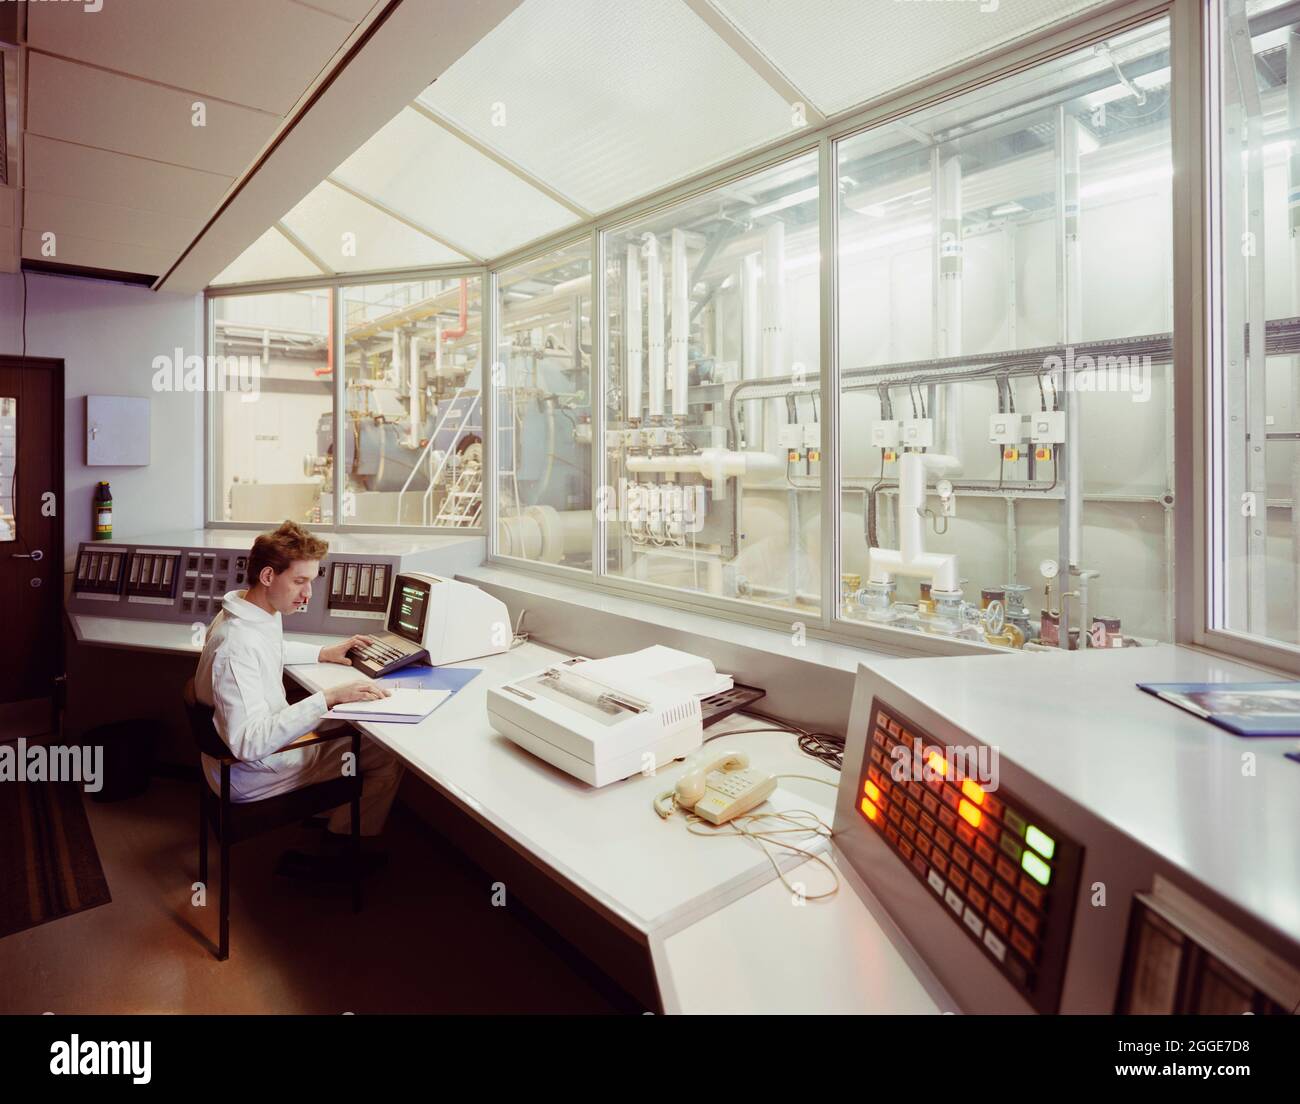 A worker entering data at a computer terminal in the control room of the boiler house at the Glaxo site in Ware. Laing built the new research building, gatehouse and services block at the Ware Glaxo site between 1985 and 1987, this &#xa3;7.5m contract was Phase IV of construction at the extensive site and multiple buildings were added in following years. Stock Photo